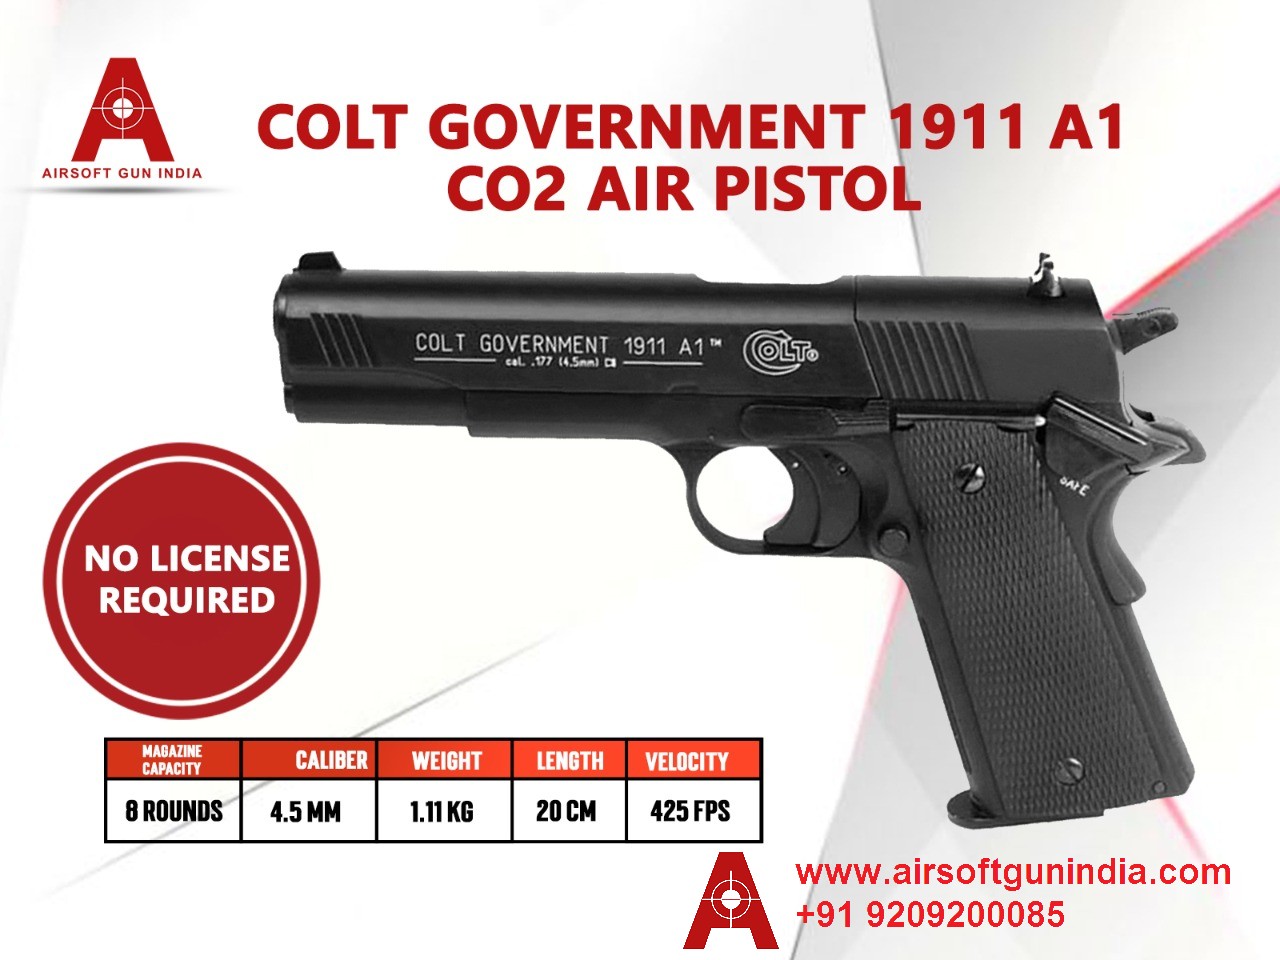 Umarex Colt Government 1911 A1 CO2 Pellets .177Cal, 4.5mm Air Pistol By Airsoft Gun India